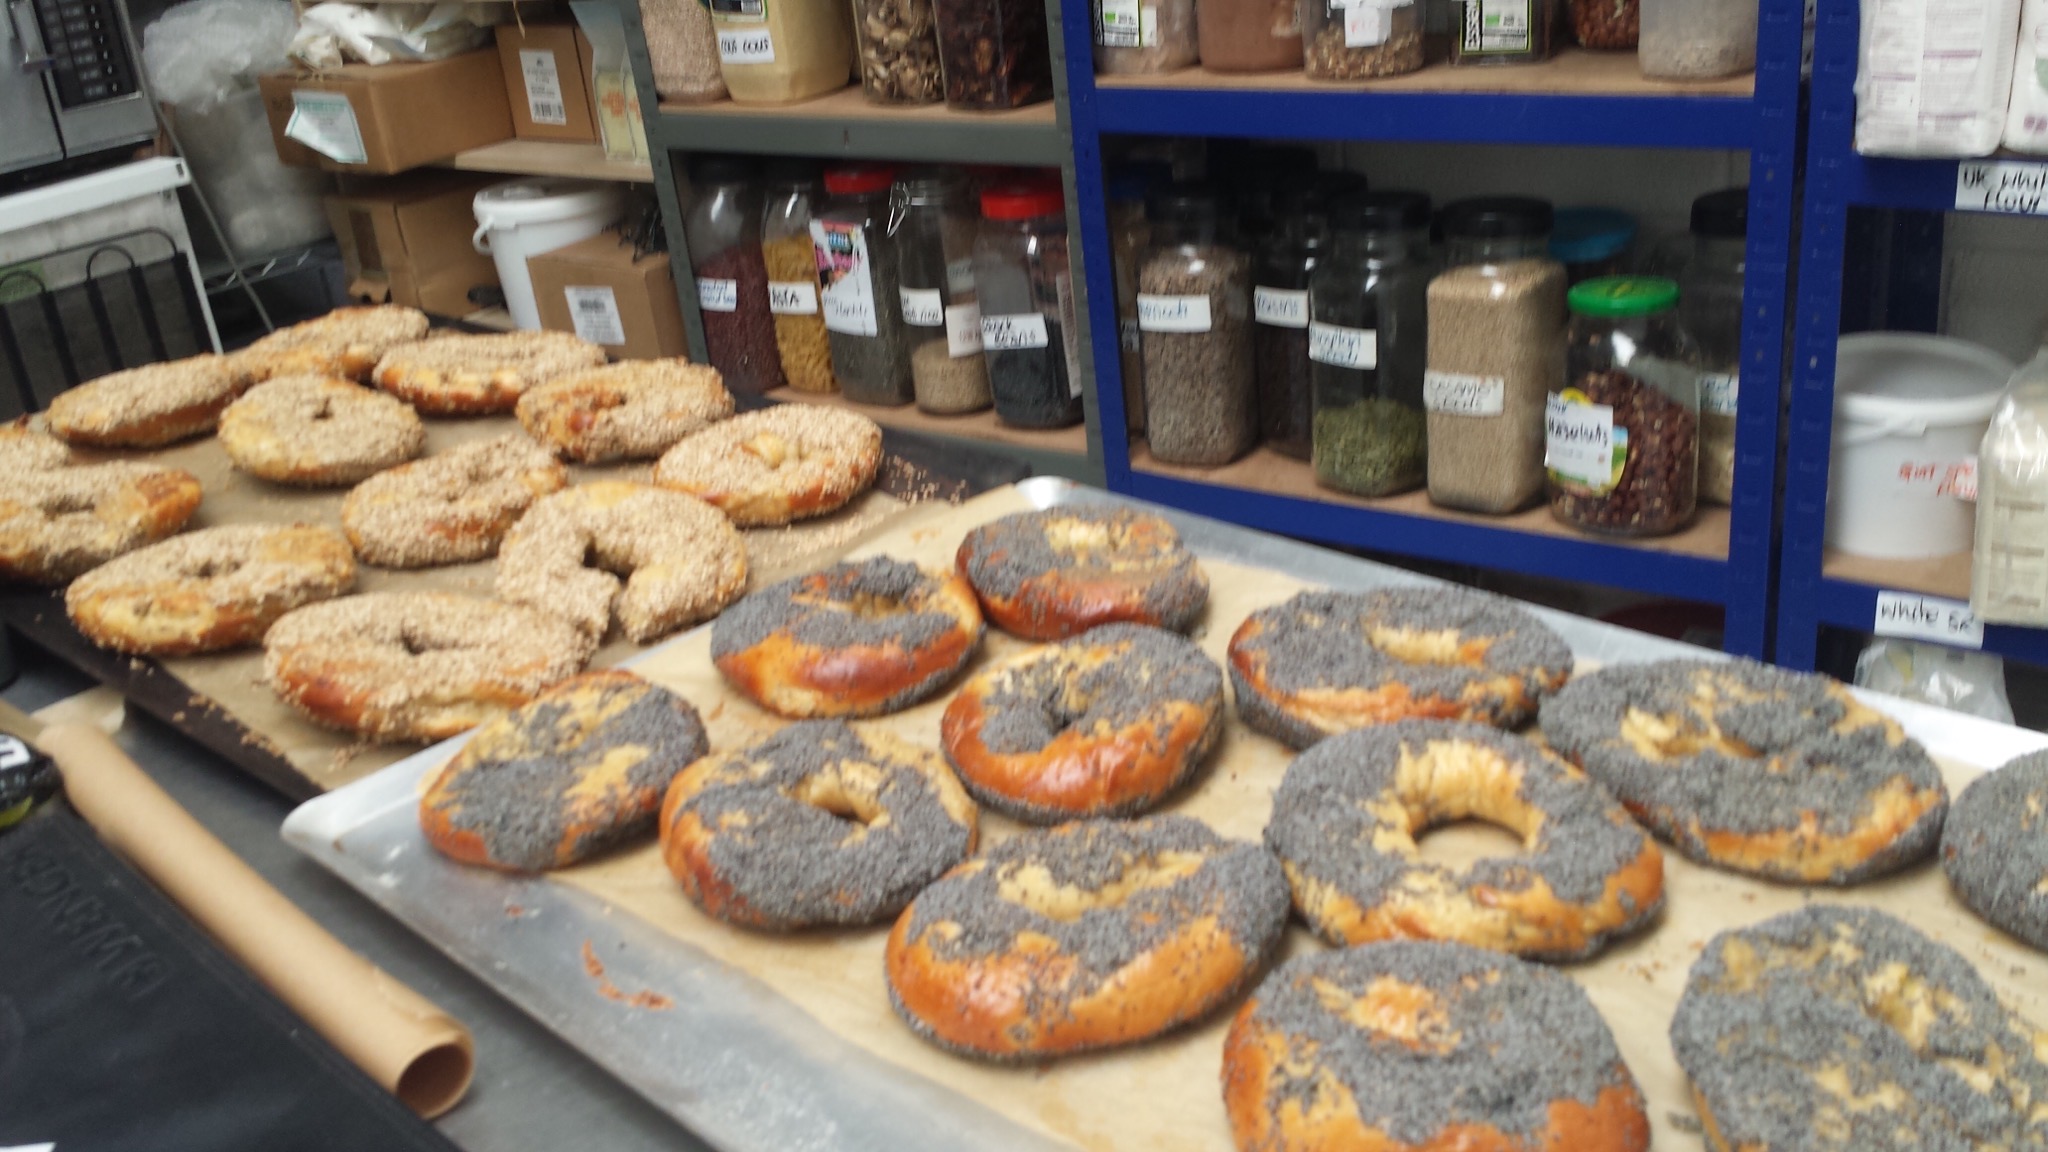 2 trays of freshly baked bagels covered in poppy and sesame seeds sitting in front of jars of cooking ingredidents